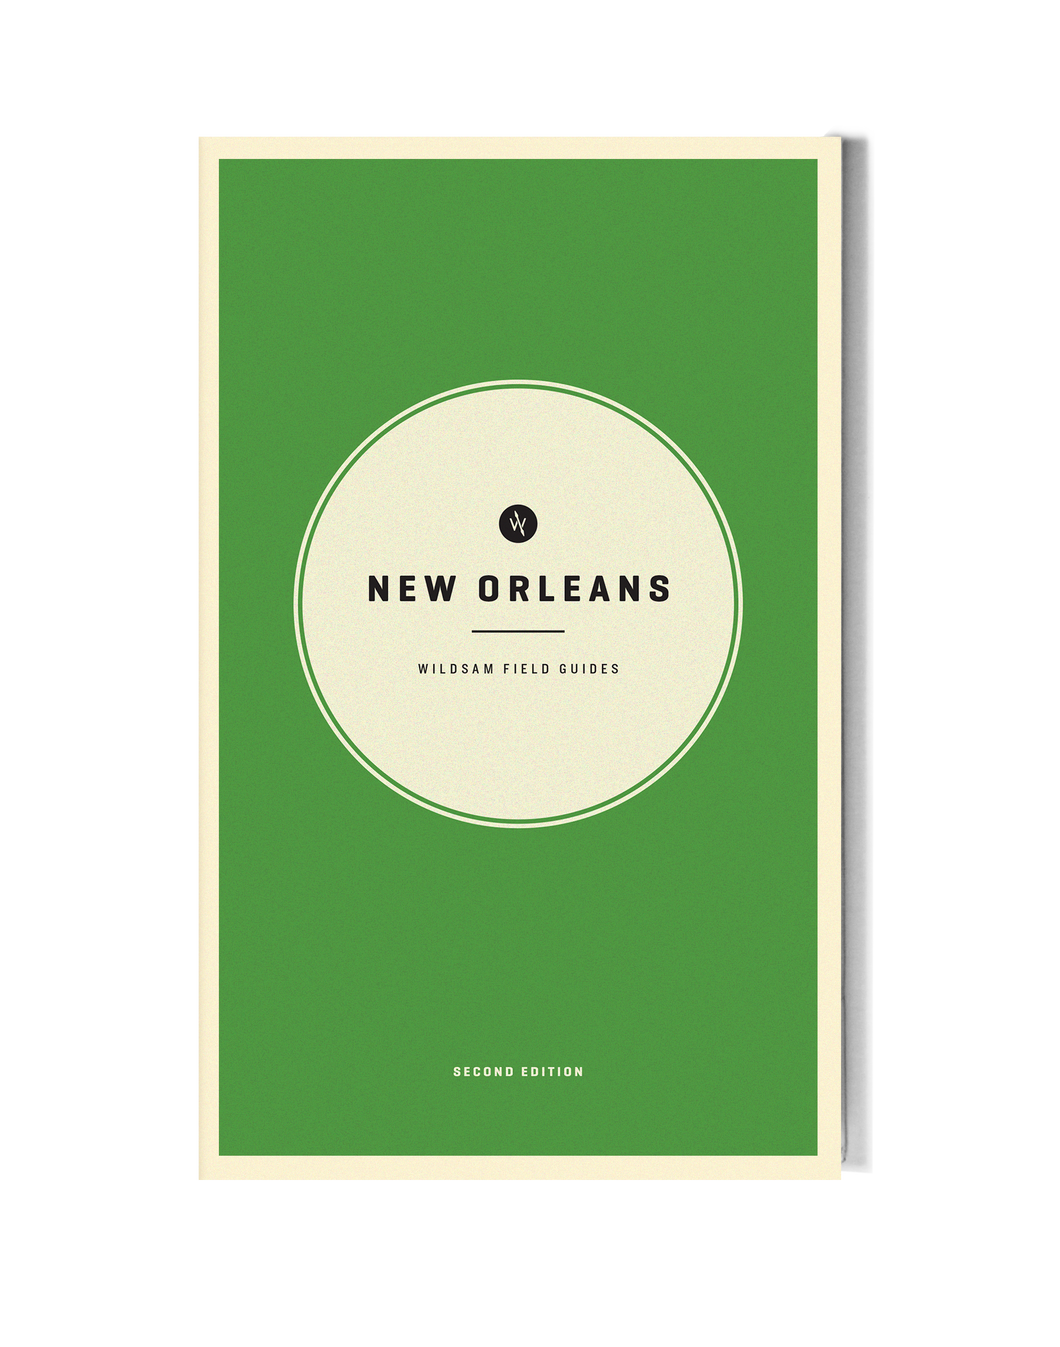 New Orleans guide book